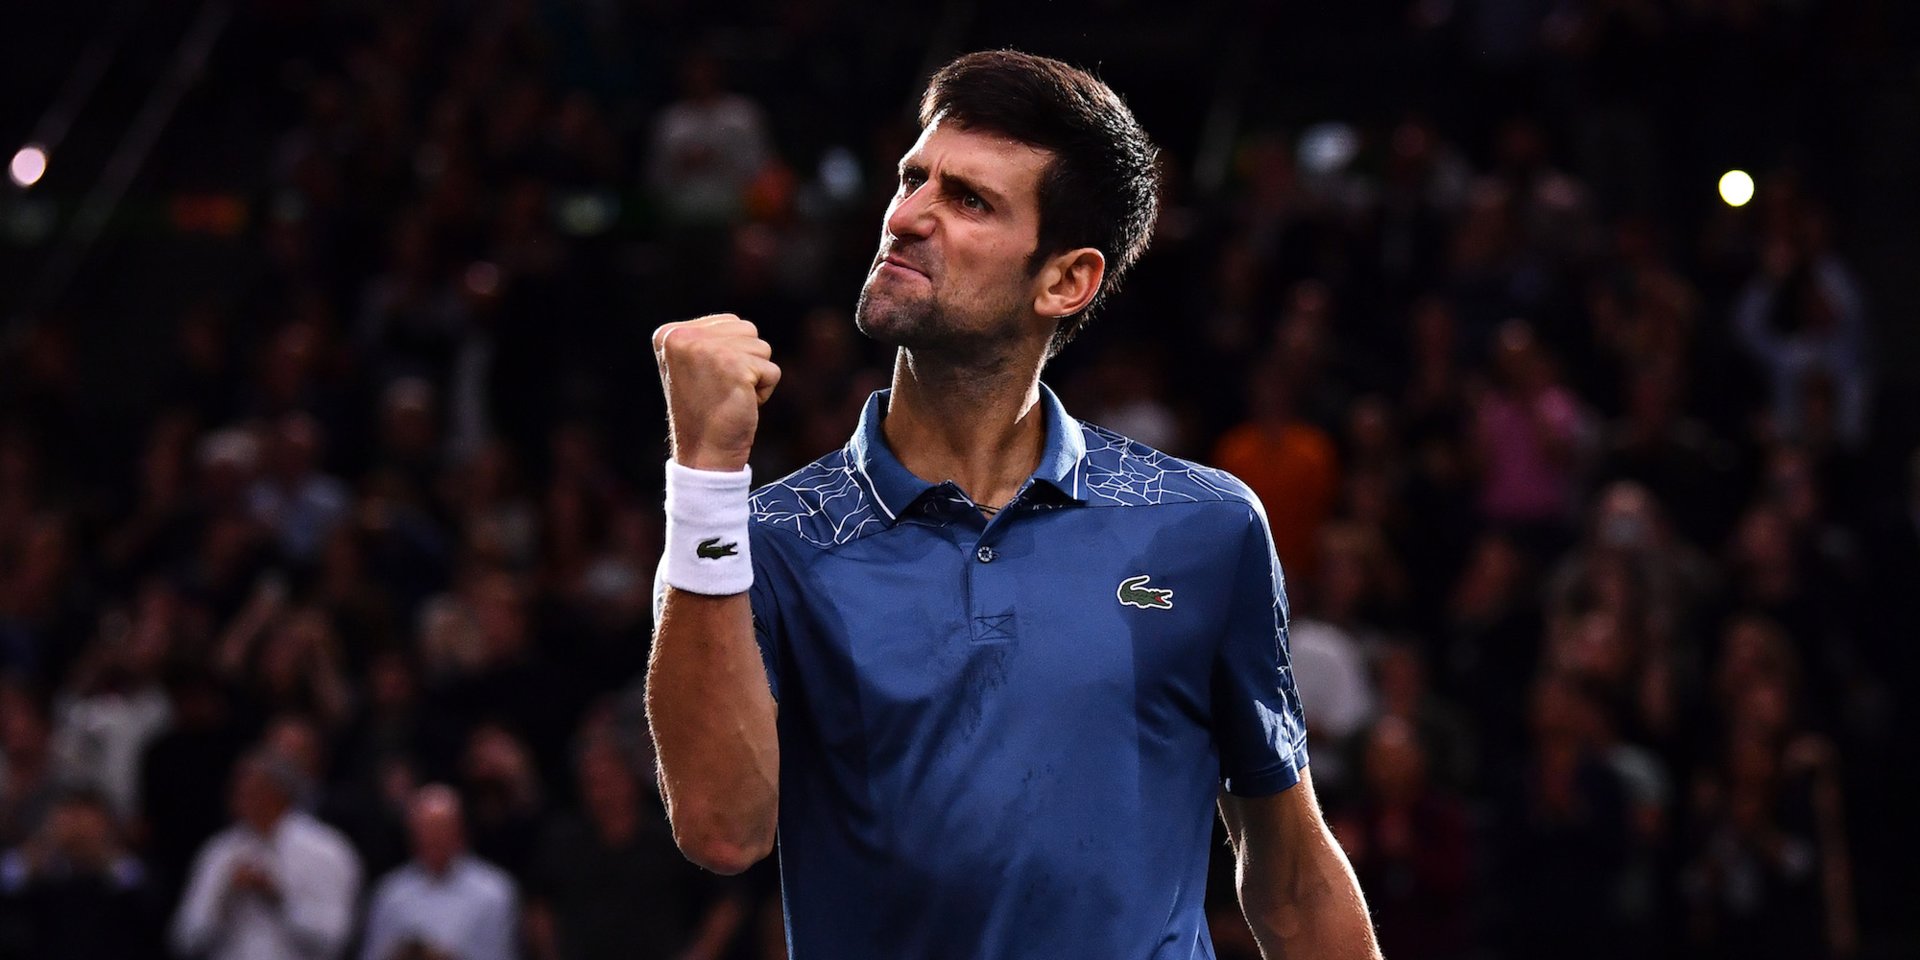 Novak Djokovic just beat Roger Federer in one of the best tennis matches you’ll see all year